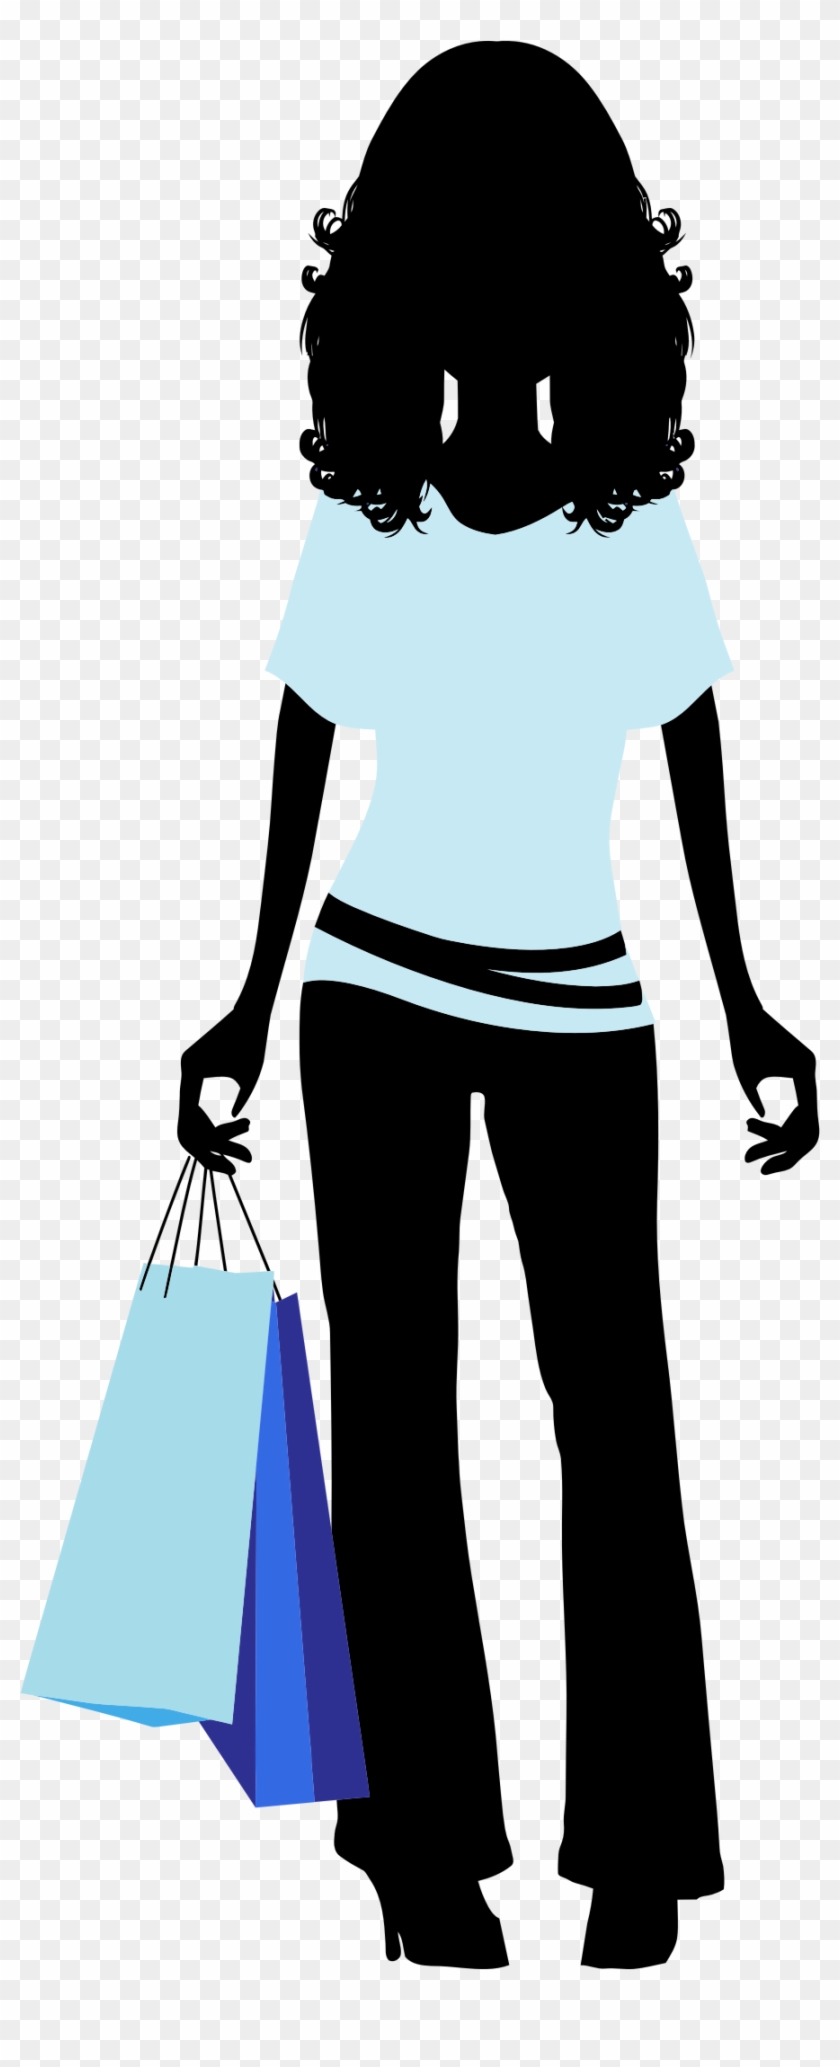 Clipart - Shopping Woman Icon Png #201522